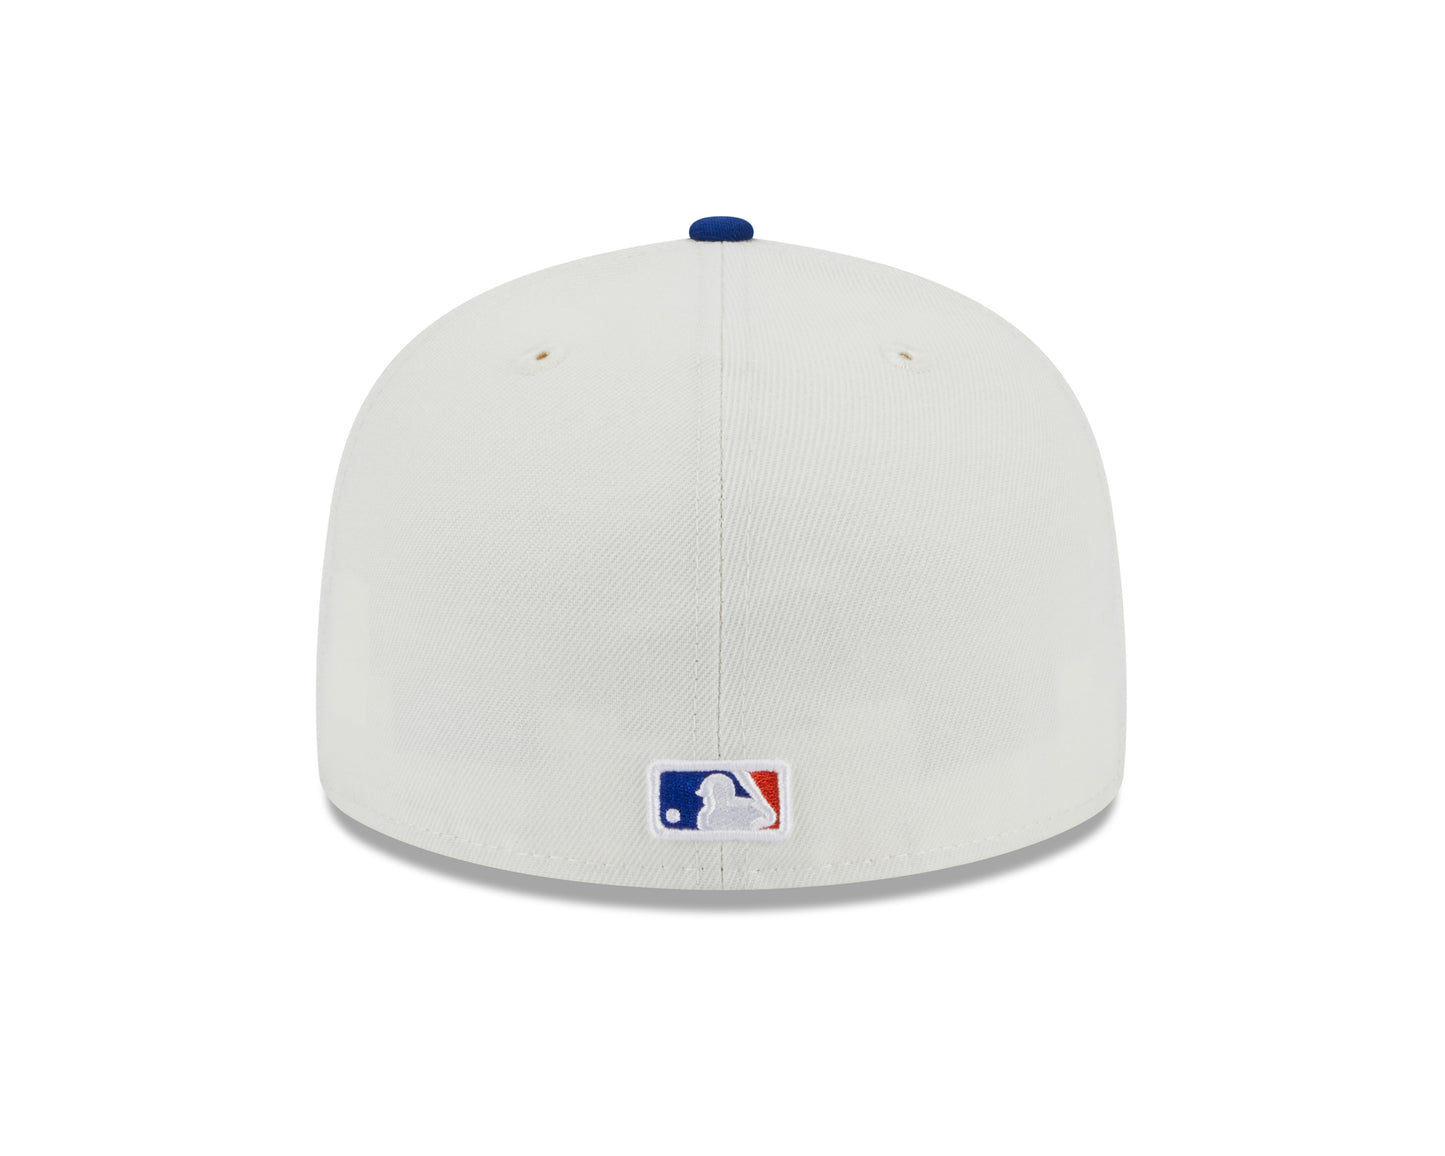 New York Mets 1982 World Series Cream/Royal New Era Retro 59FIFTY Fitted Hat